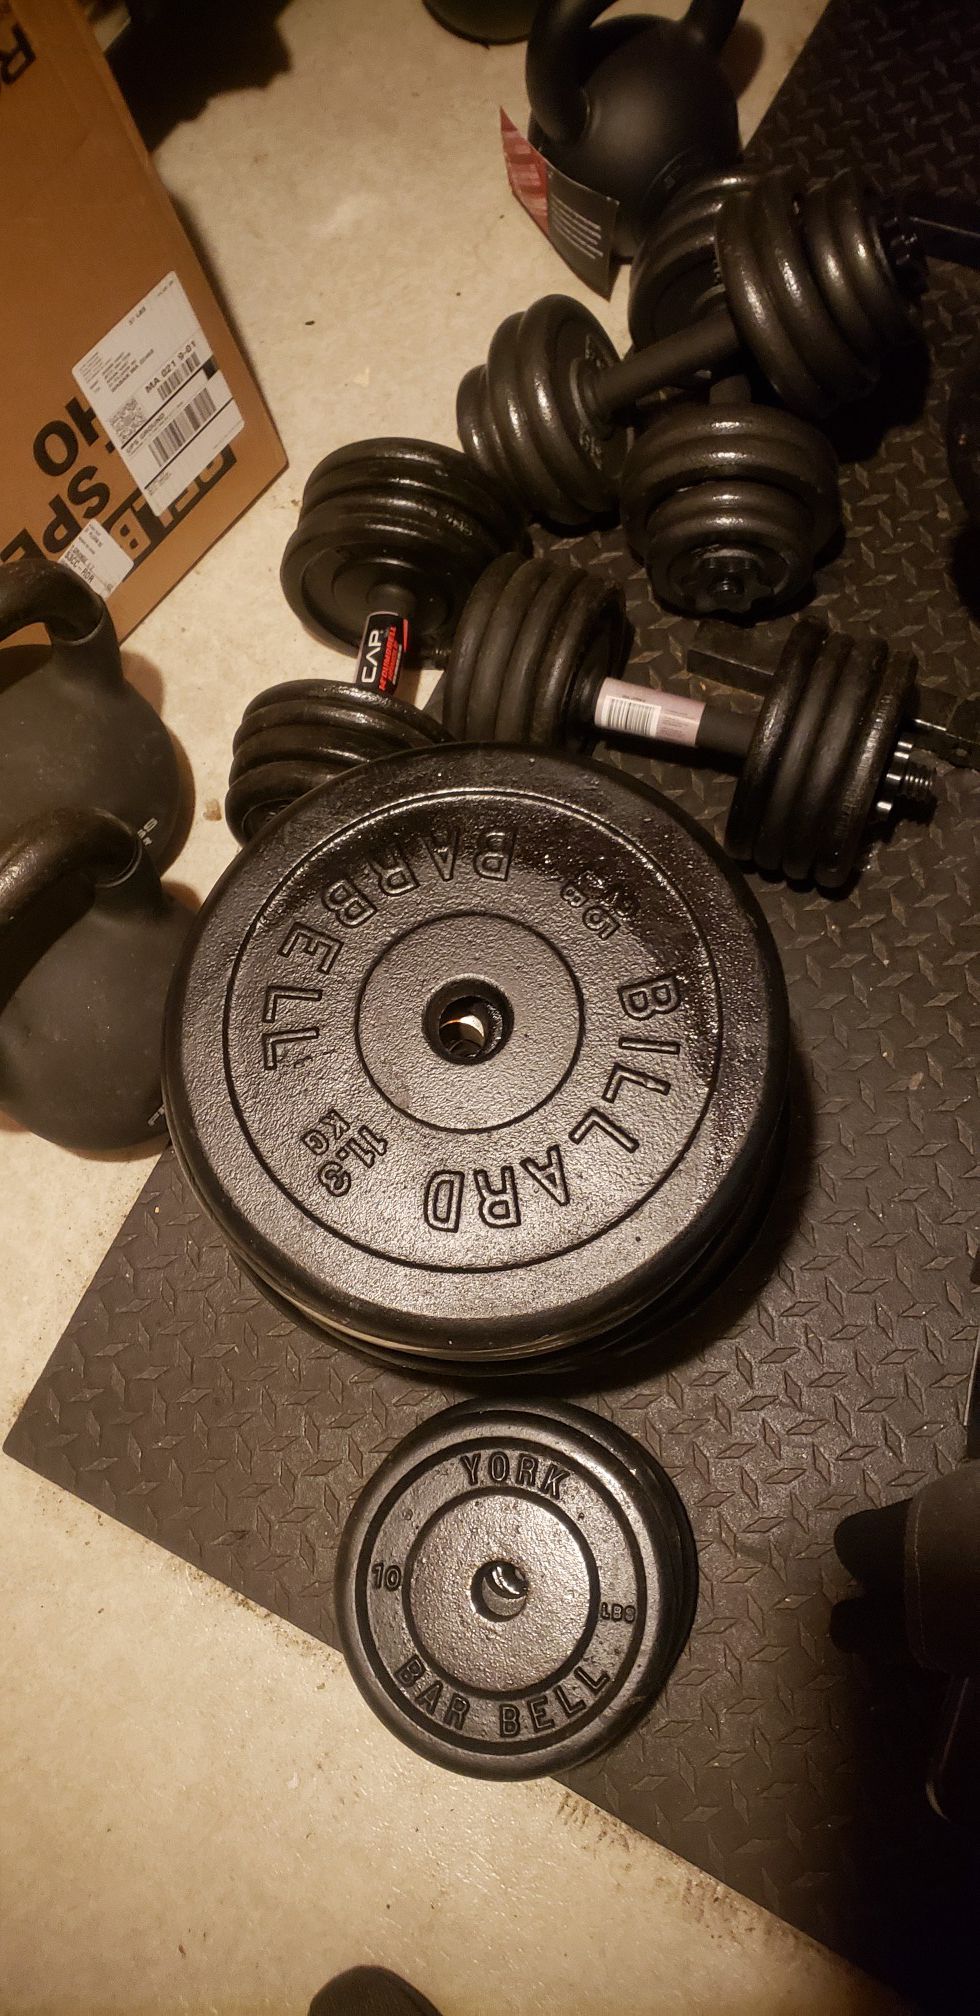 1" weight and barbells